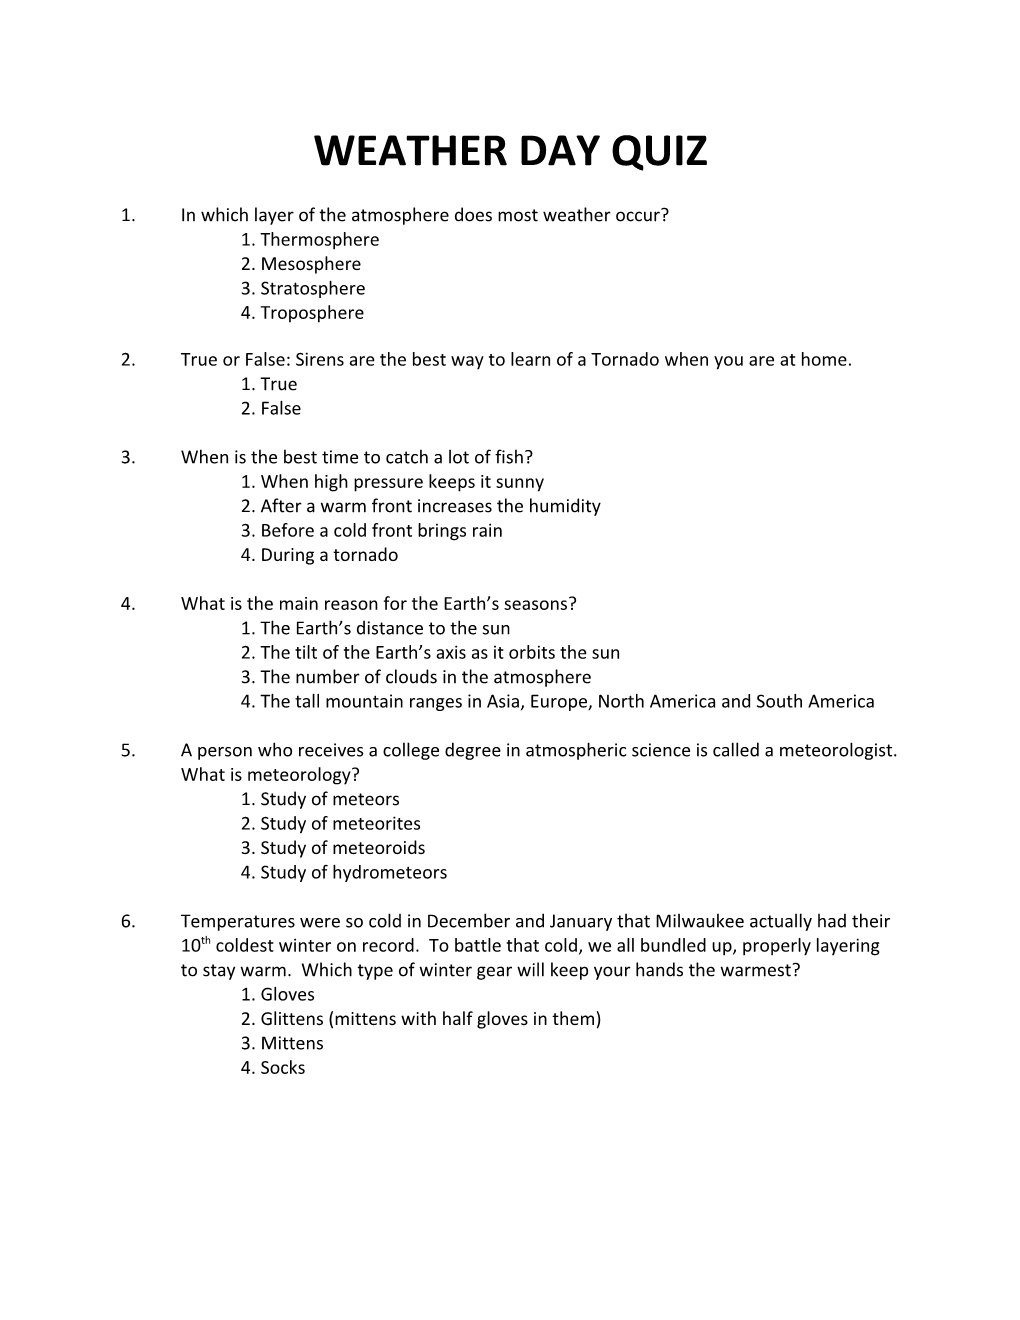 1.In Which Layer of the Atmosphere Does Most Weather Occur?